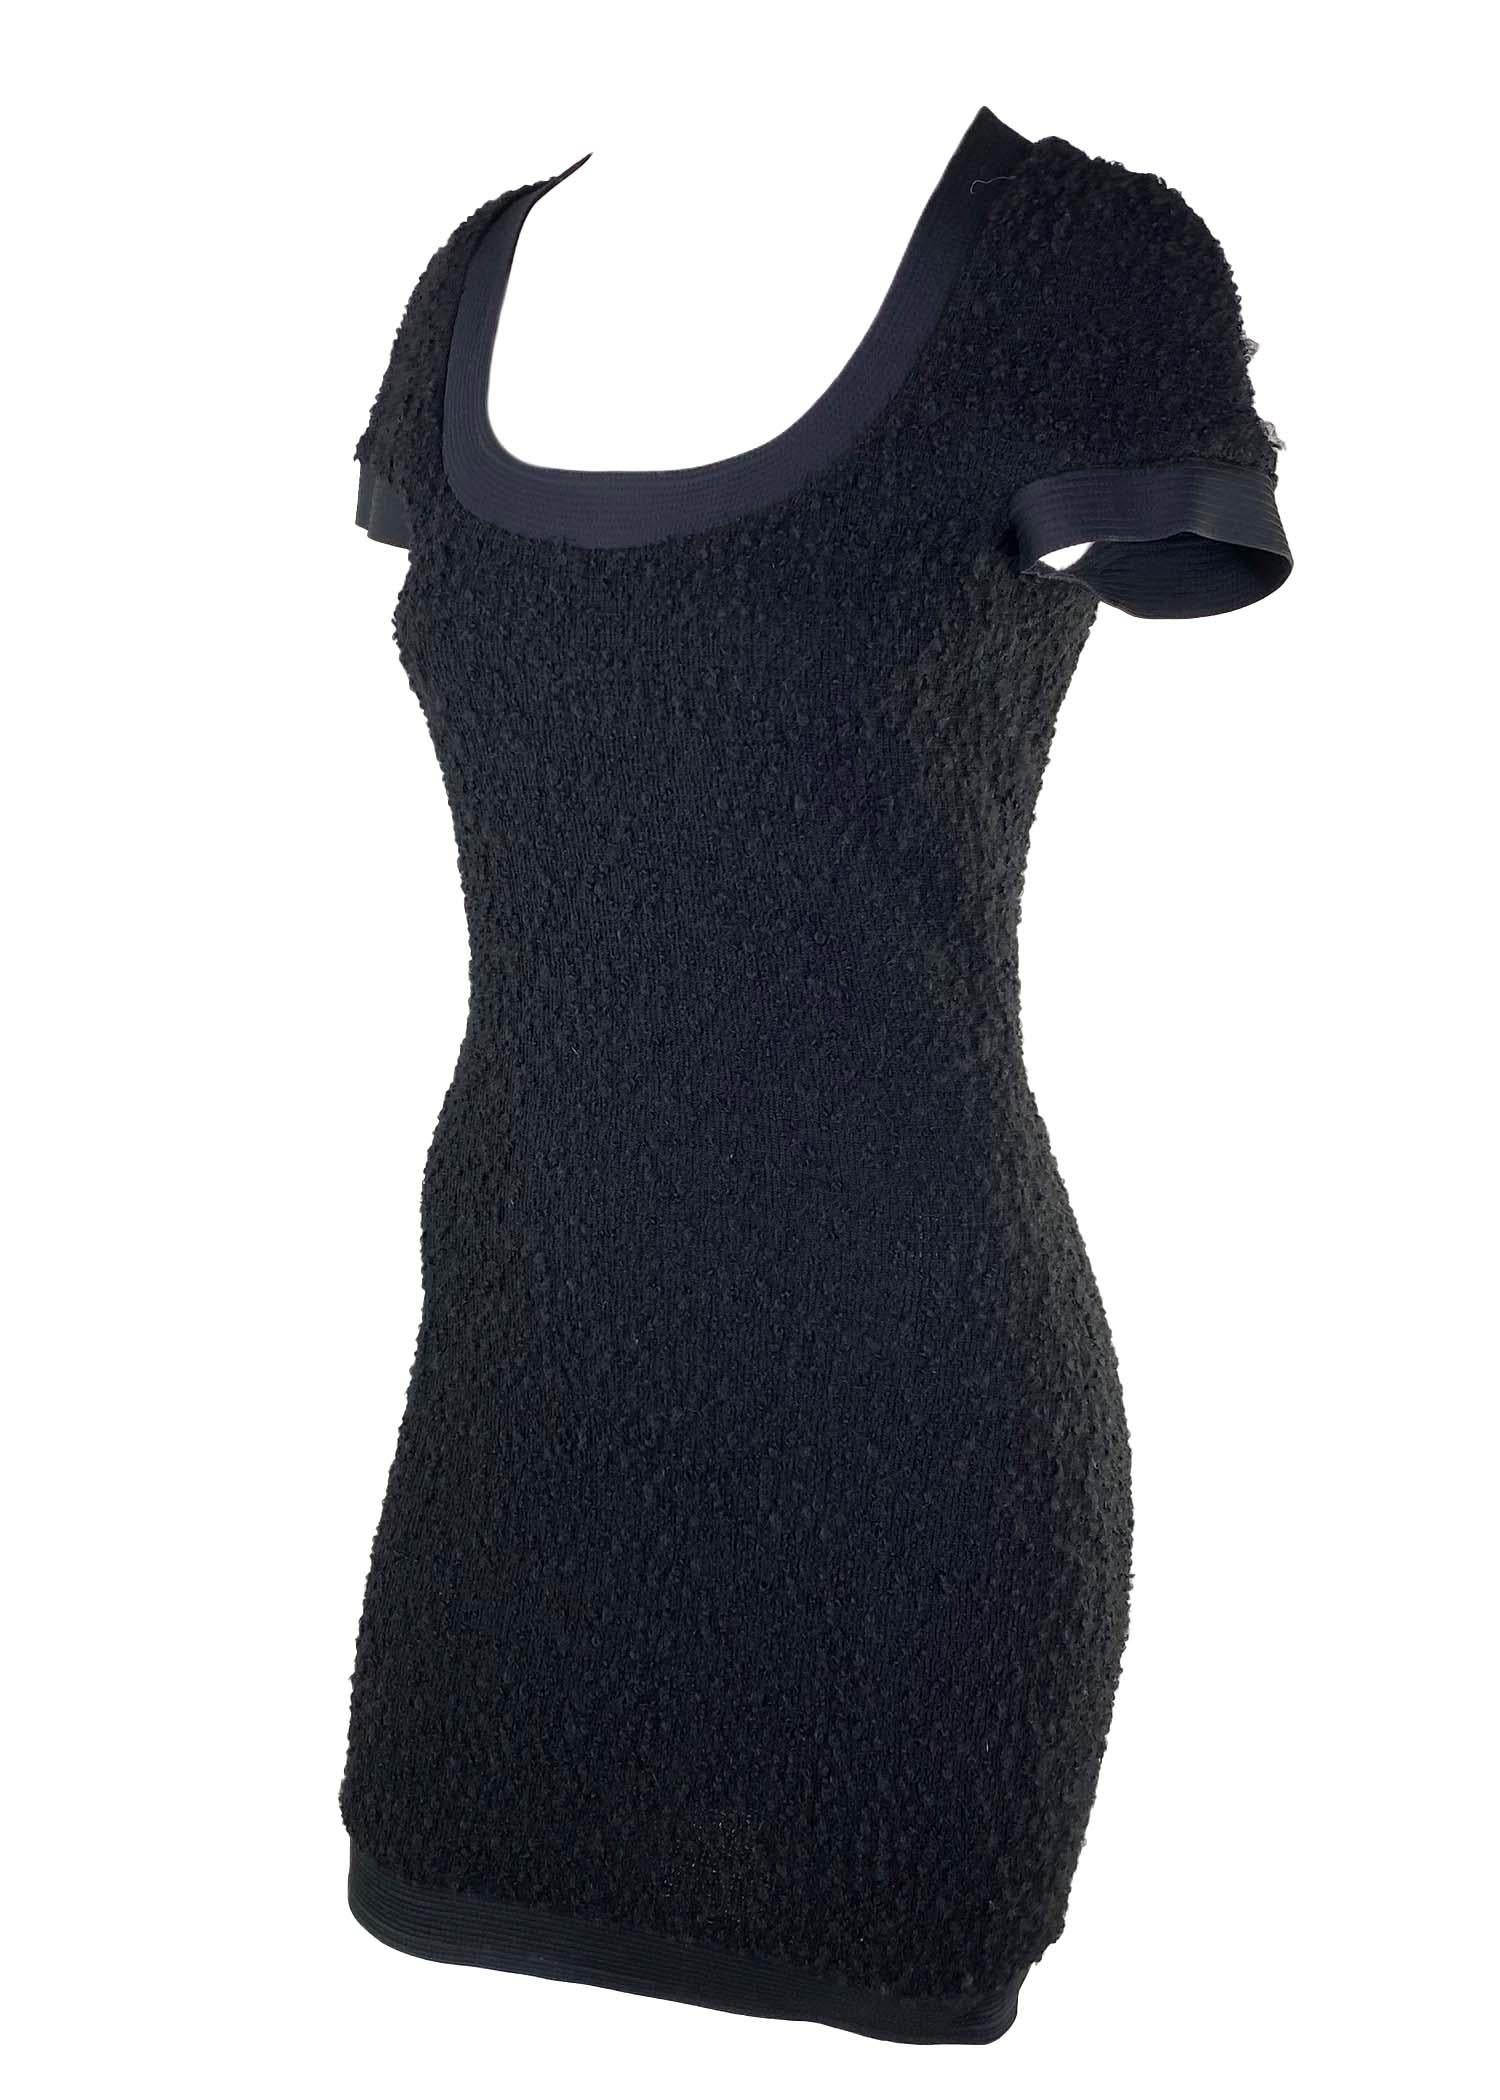 F/W 1991 Gianni Versace Couture Runway Black Stretch Bouclé Wool Mini Dress LBD In Good Condition For Sale In West Hollywood, CA